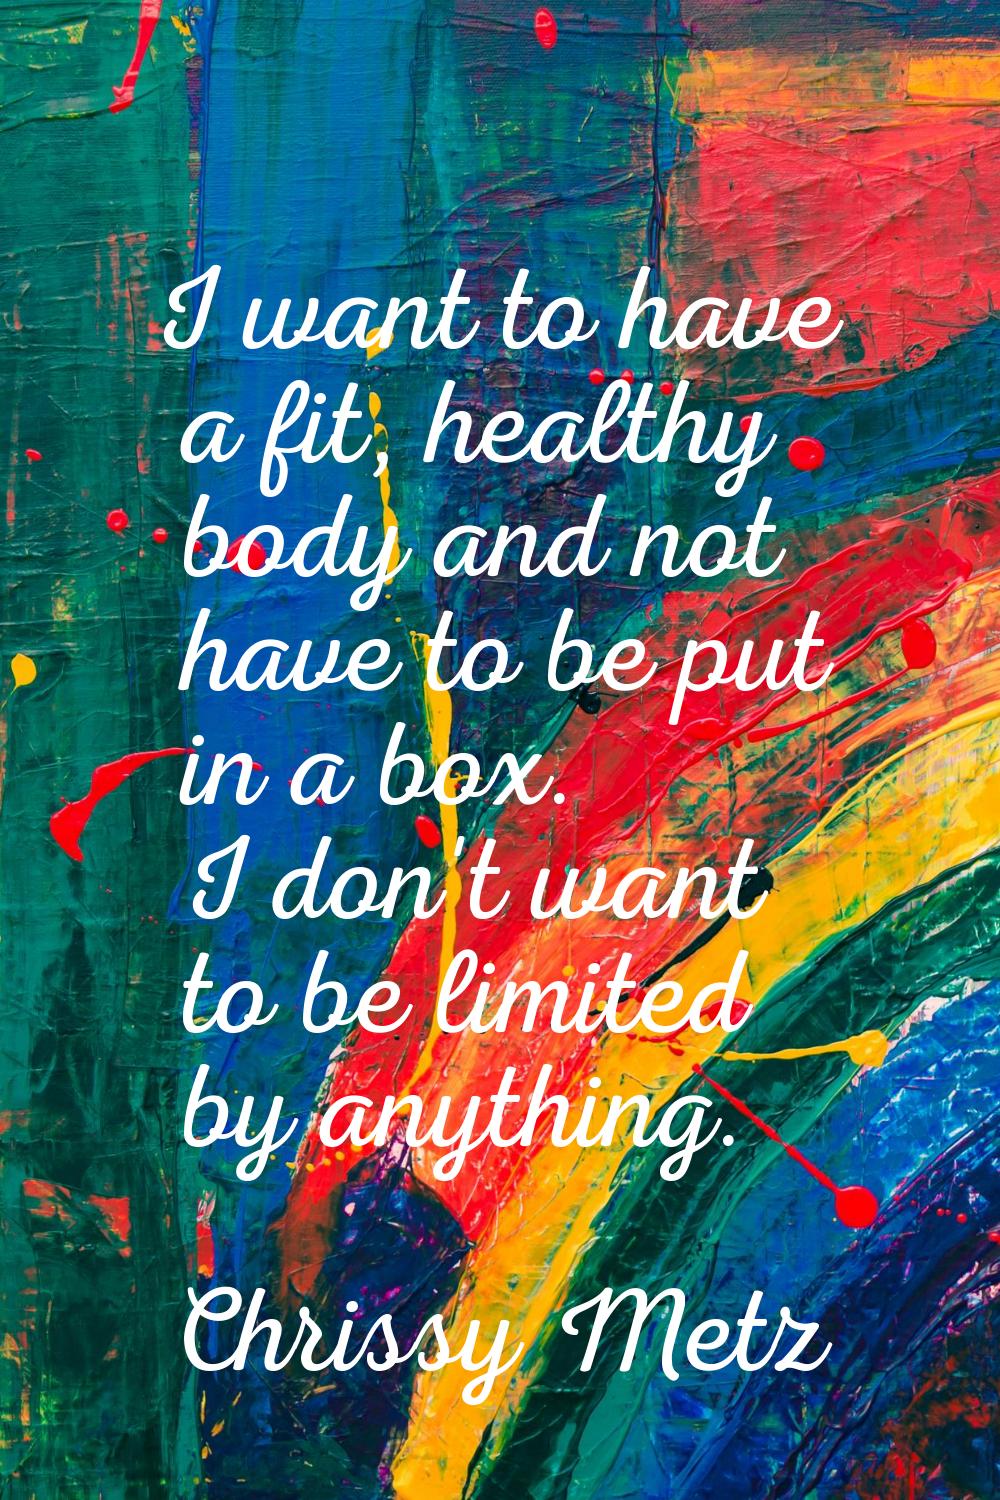 I want to have a fit, healthy body and not have to be put in a box. I don't want to be limited by a